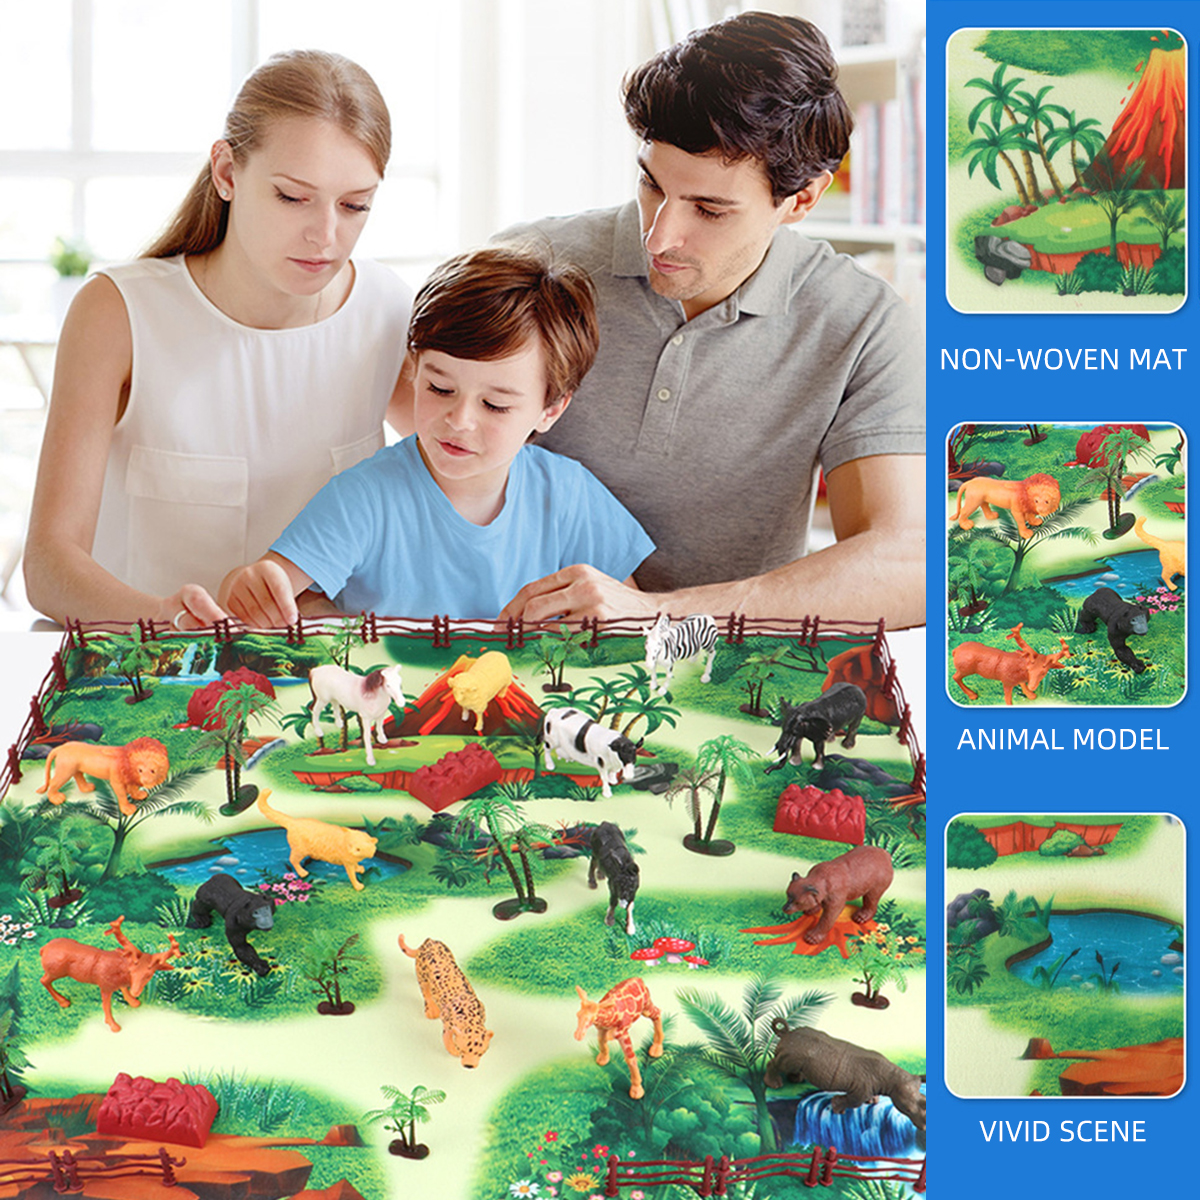 2833346365Pcs-Multi-style-Diecast-Dinosaurs-Model-Play-Set-Educational-Toy-with-Play-Mat-for-Kids-Ch-1836203-2